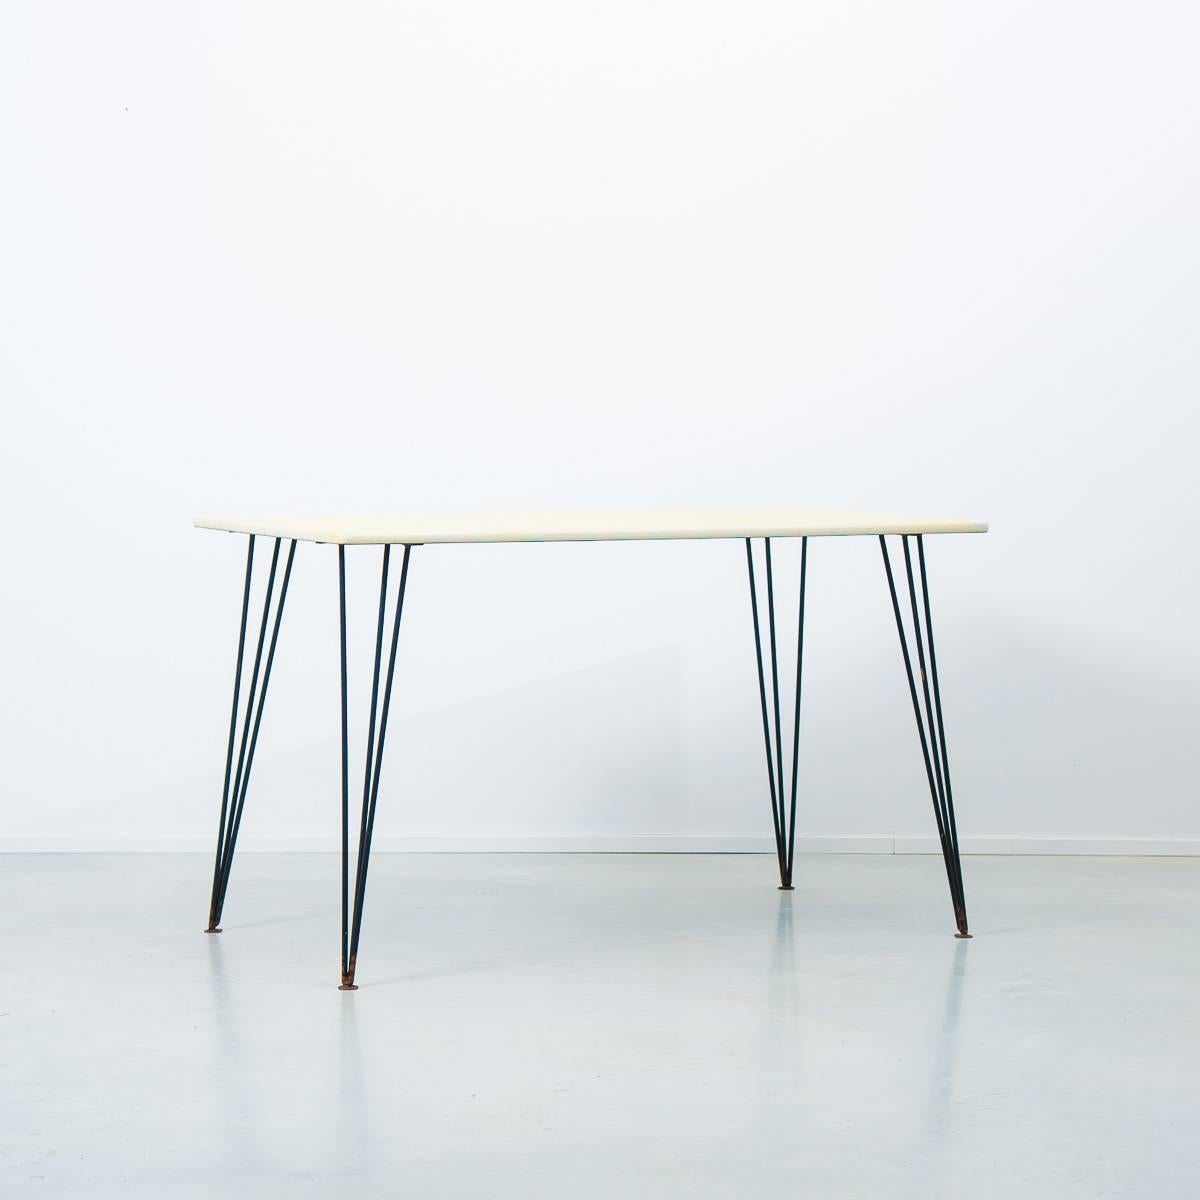 Paul K. Bridston was house designer at Kandya Ltd, working alongside design consultant Frank Guille who was famous for the iconic 'Jason' chair. Bridston is well-known for his model 374 desk, near identical to this table. Both are made from painted